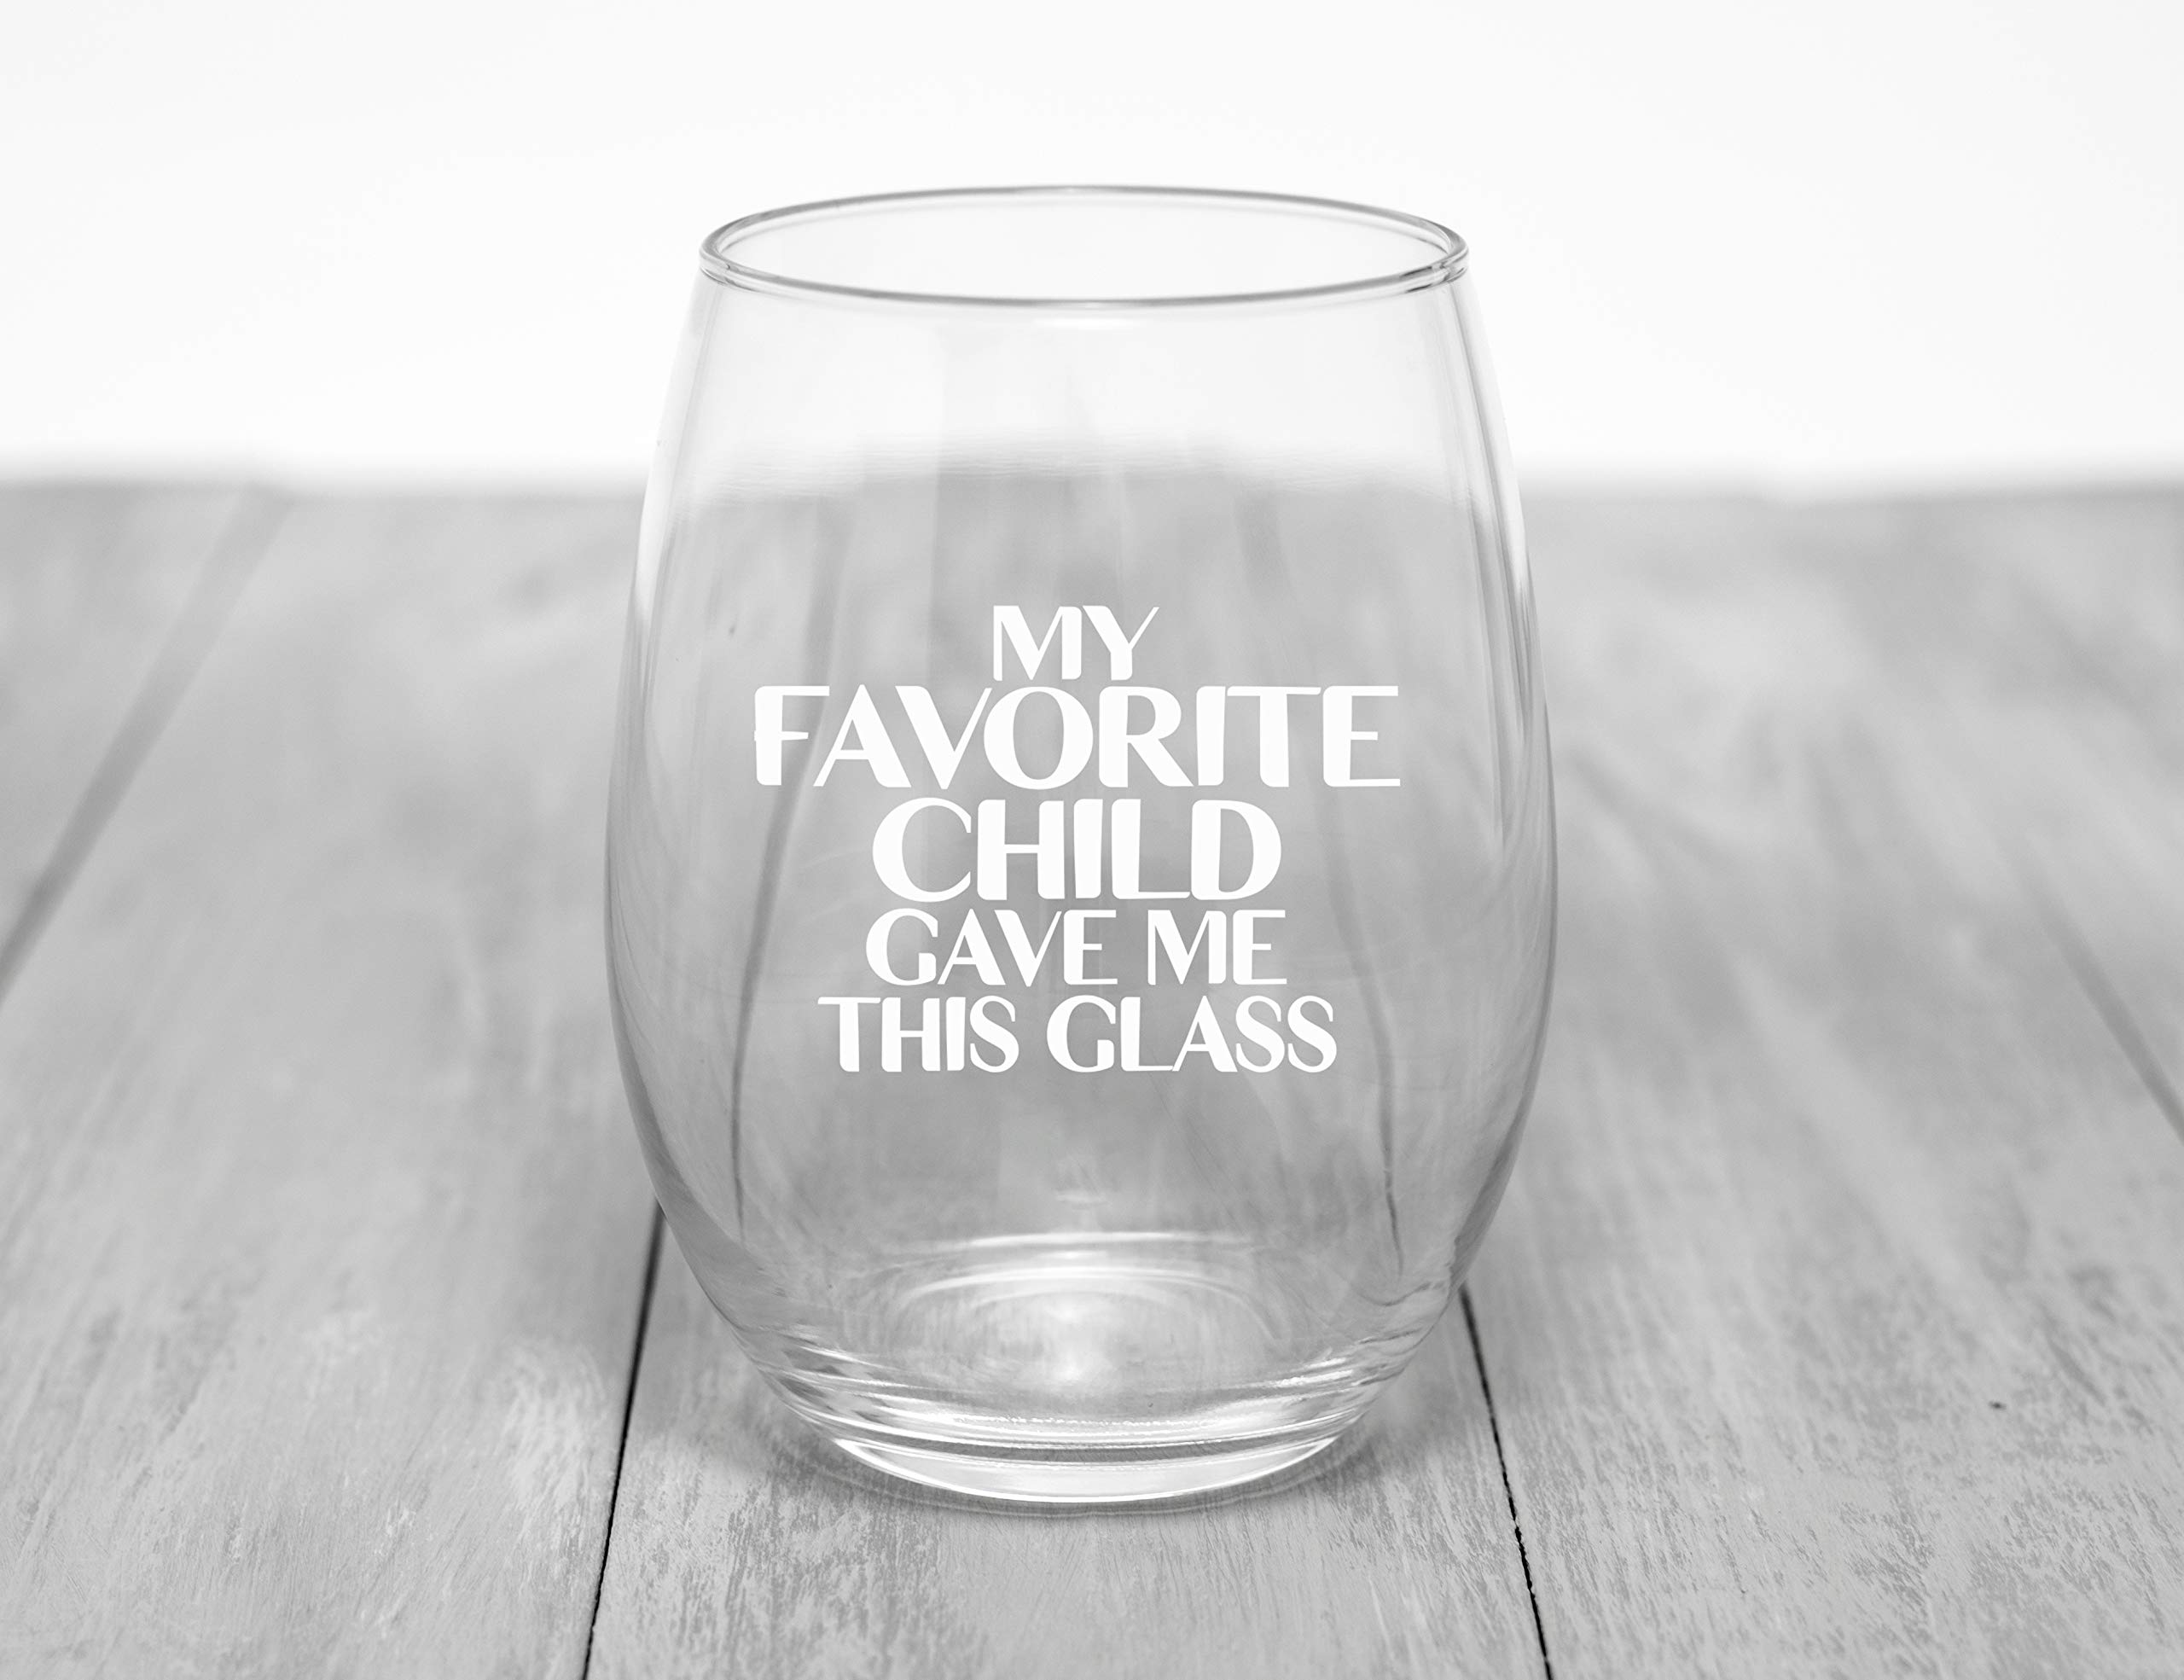 Favorite Child Gifts for Mom - My Favorite Child Gave Me This Glass - Funny Wine Glass for Mom, Dad - Novelty Christmas, Birthday, Mom Gifts From Daughter or Son - 15oz Made in USA